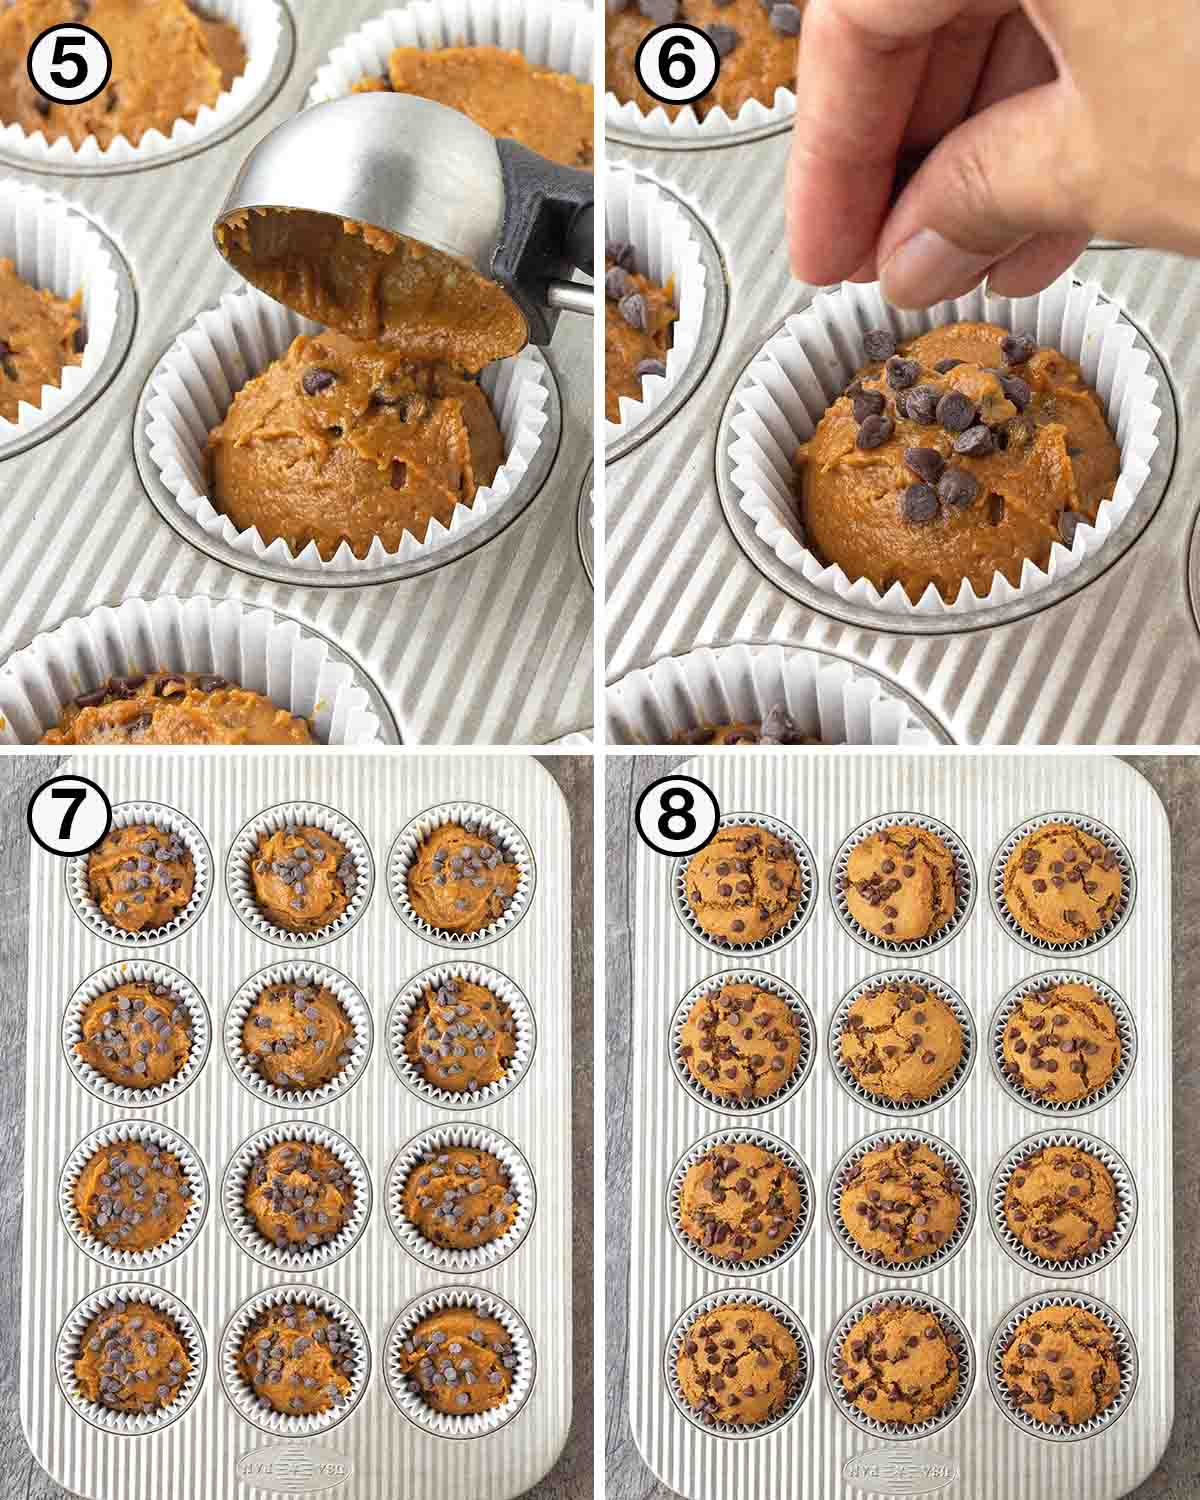 A collage of four images showing the second sequence of steps needed to make vegan sweet potato muffins.